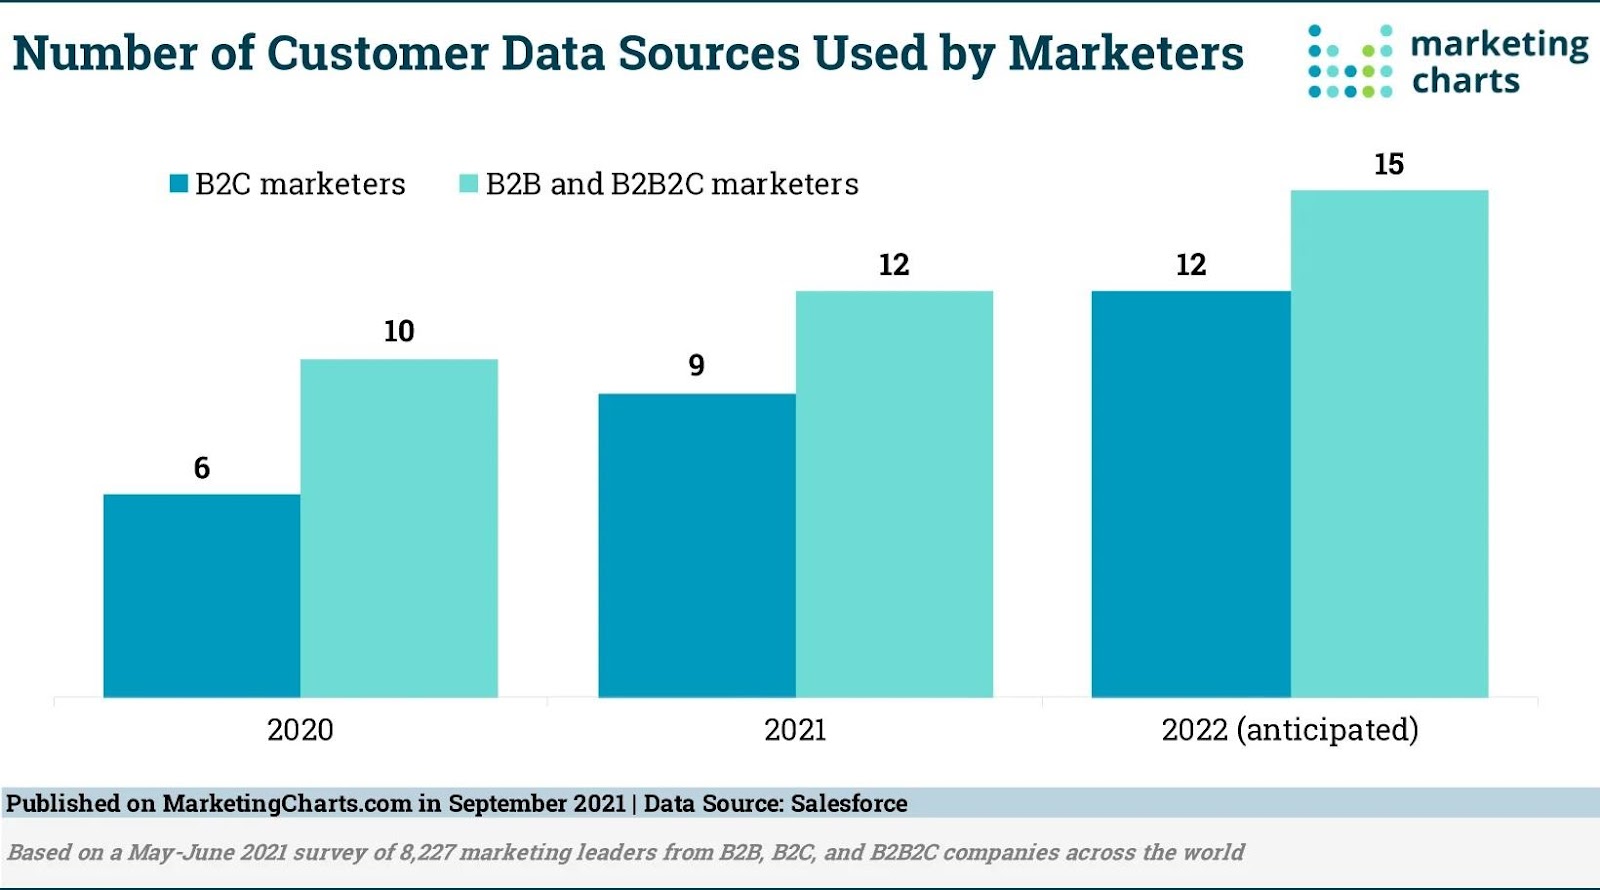 B2B marketers say this year they anticipate using up to 12 different customer data sources.